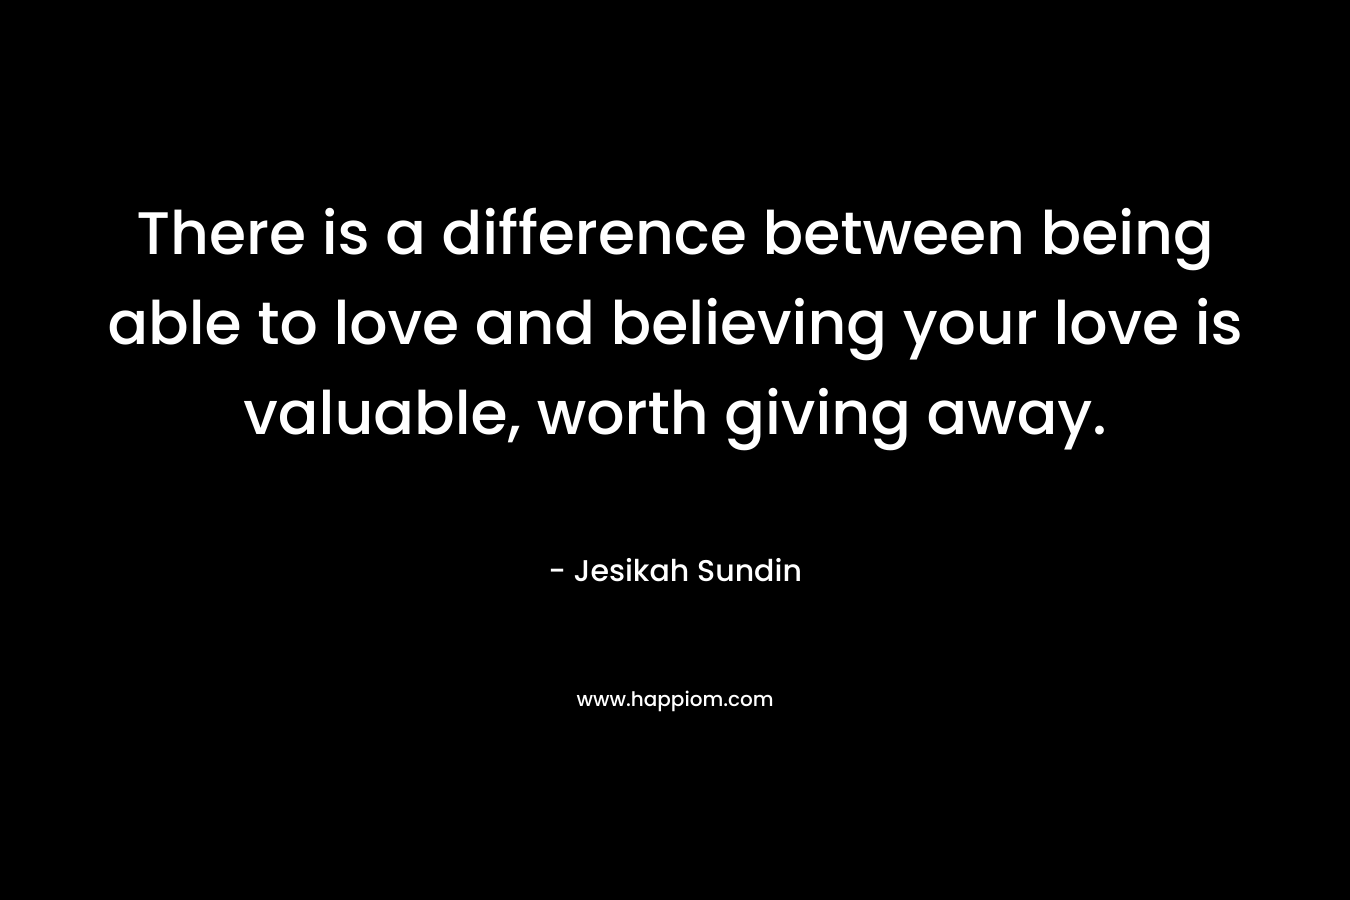 There is a difference between being able to love and believing your love is valuable, worth giving away. – Jesikah Sundin